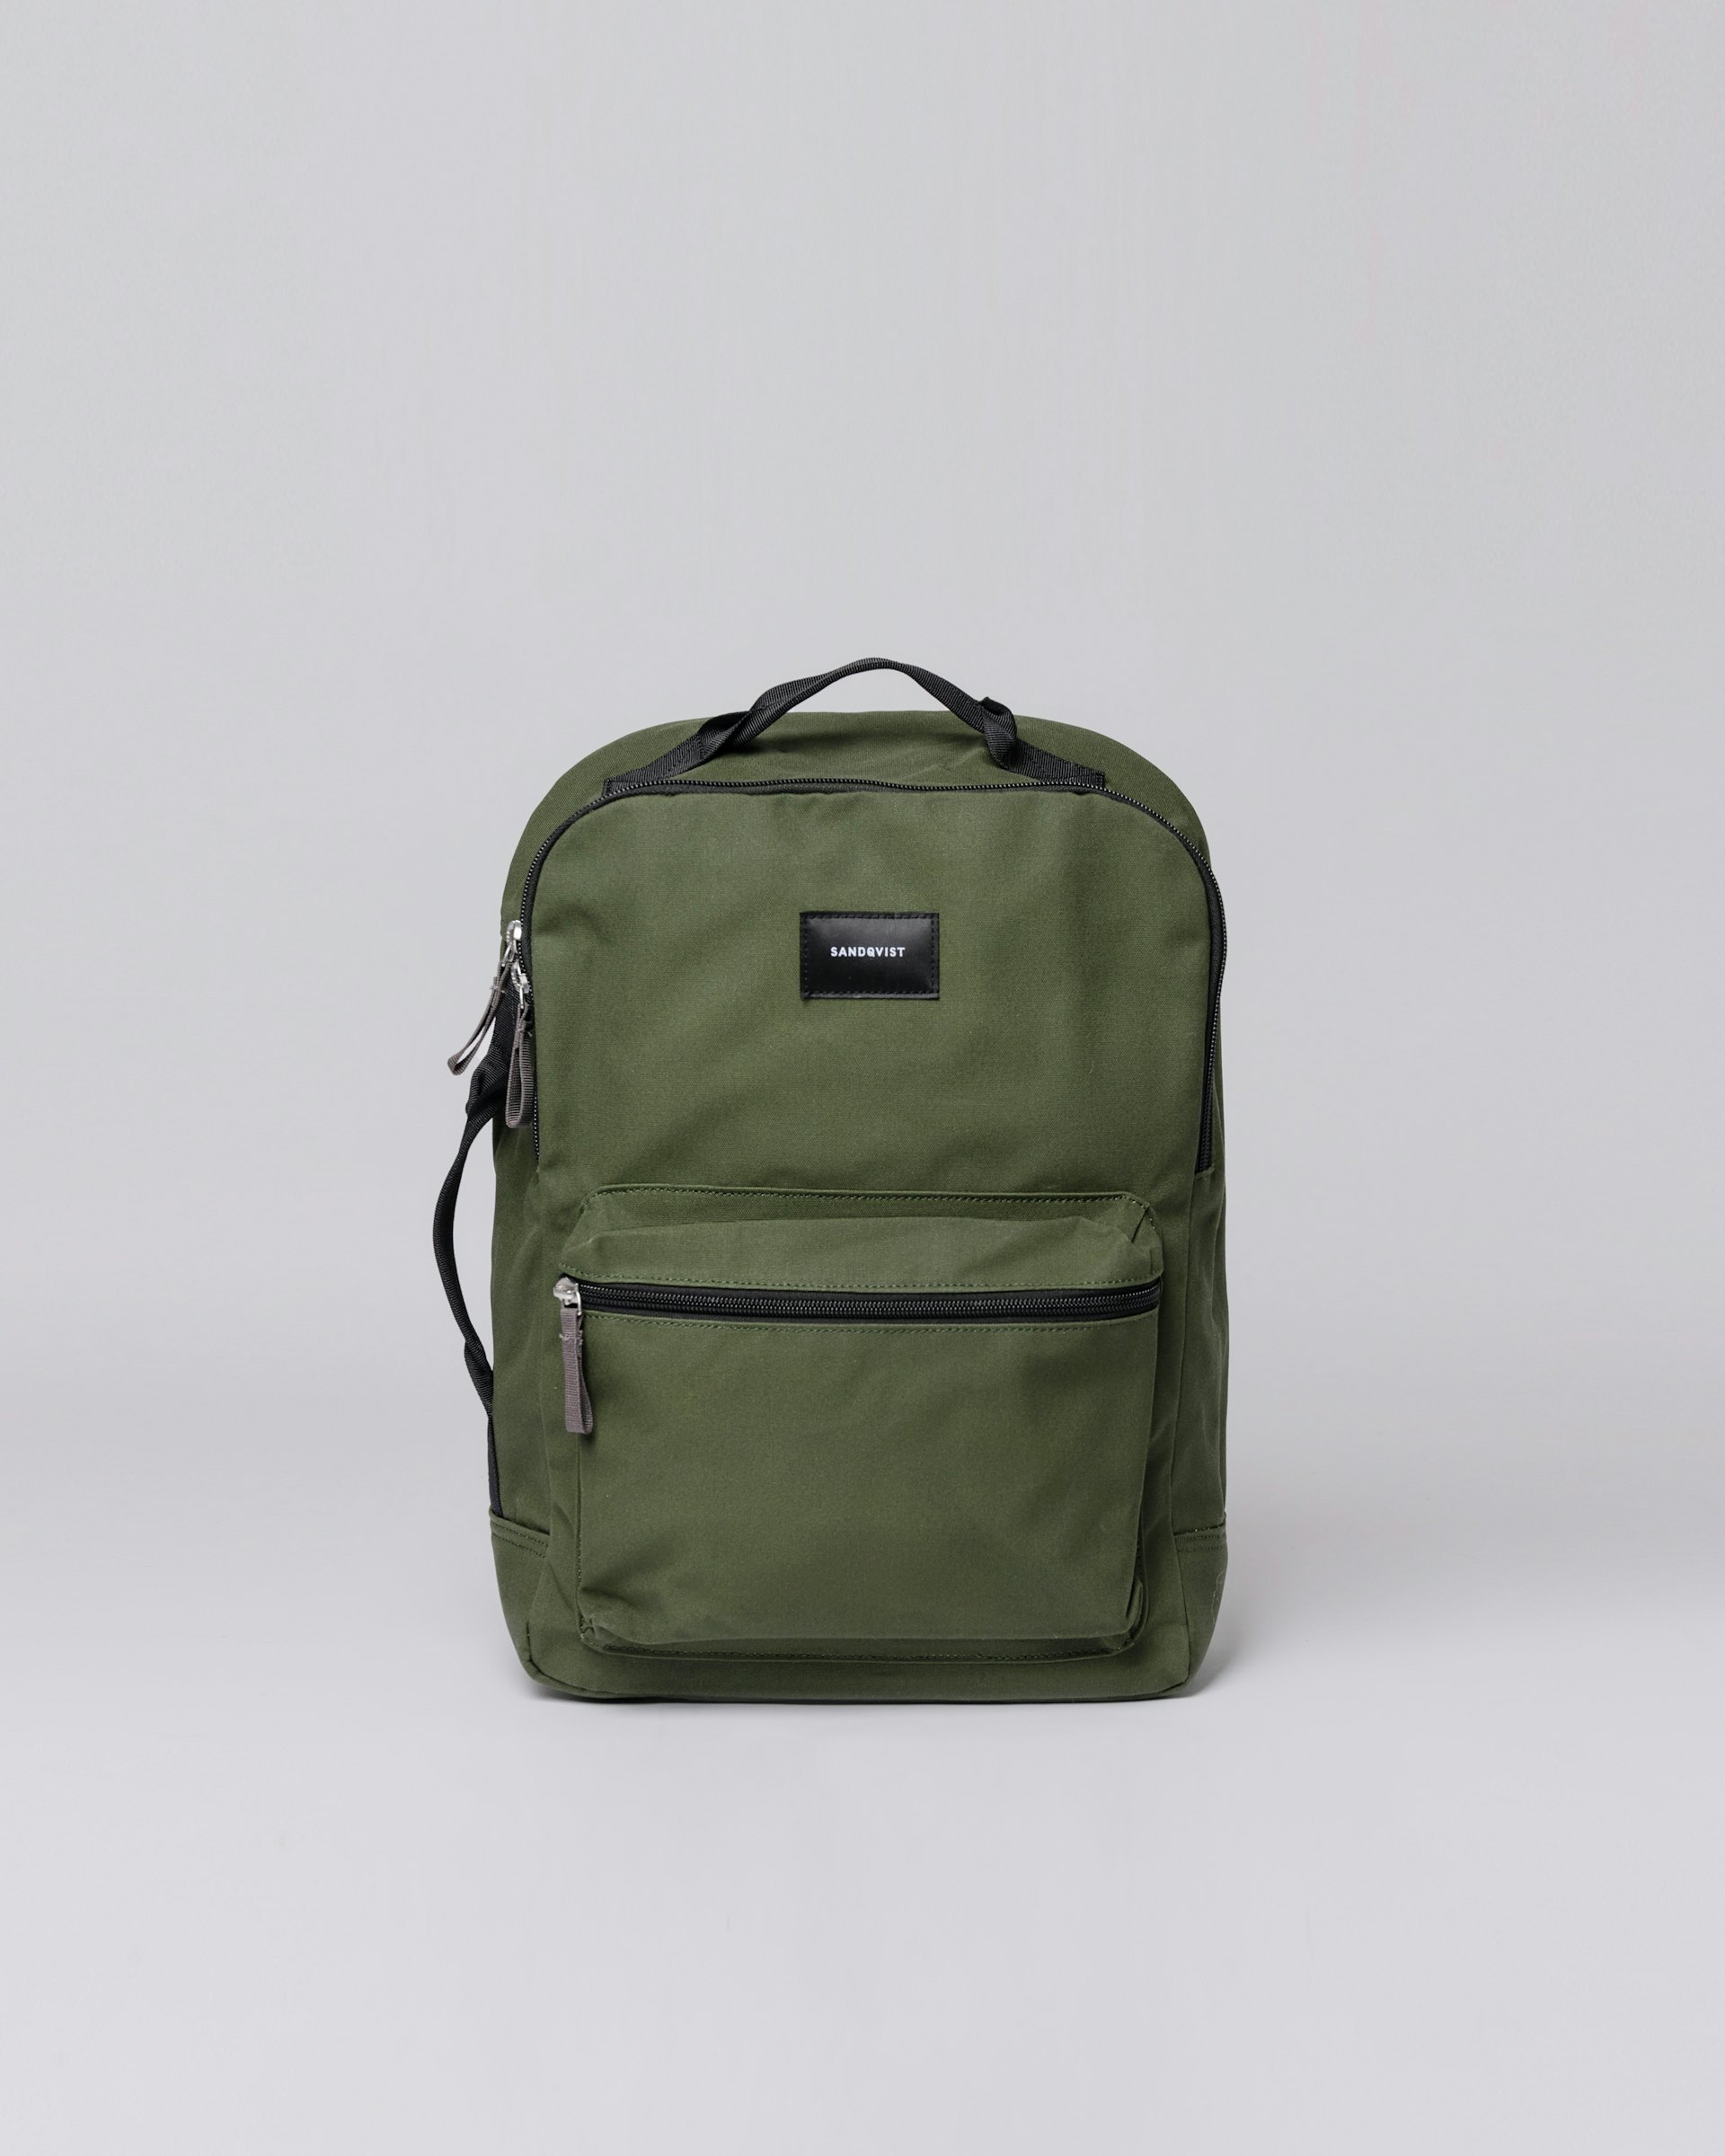 August belongs to the category Backpacks and is in color dawn green (1 of 5)